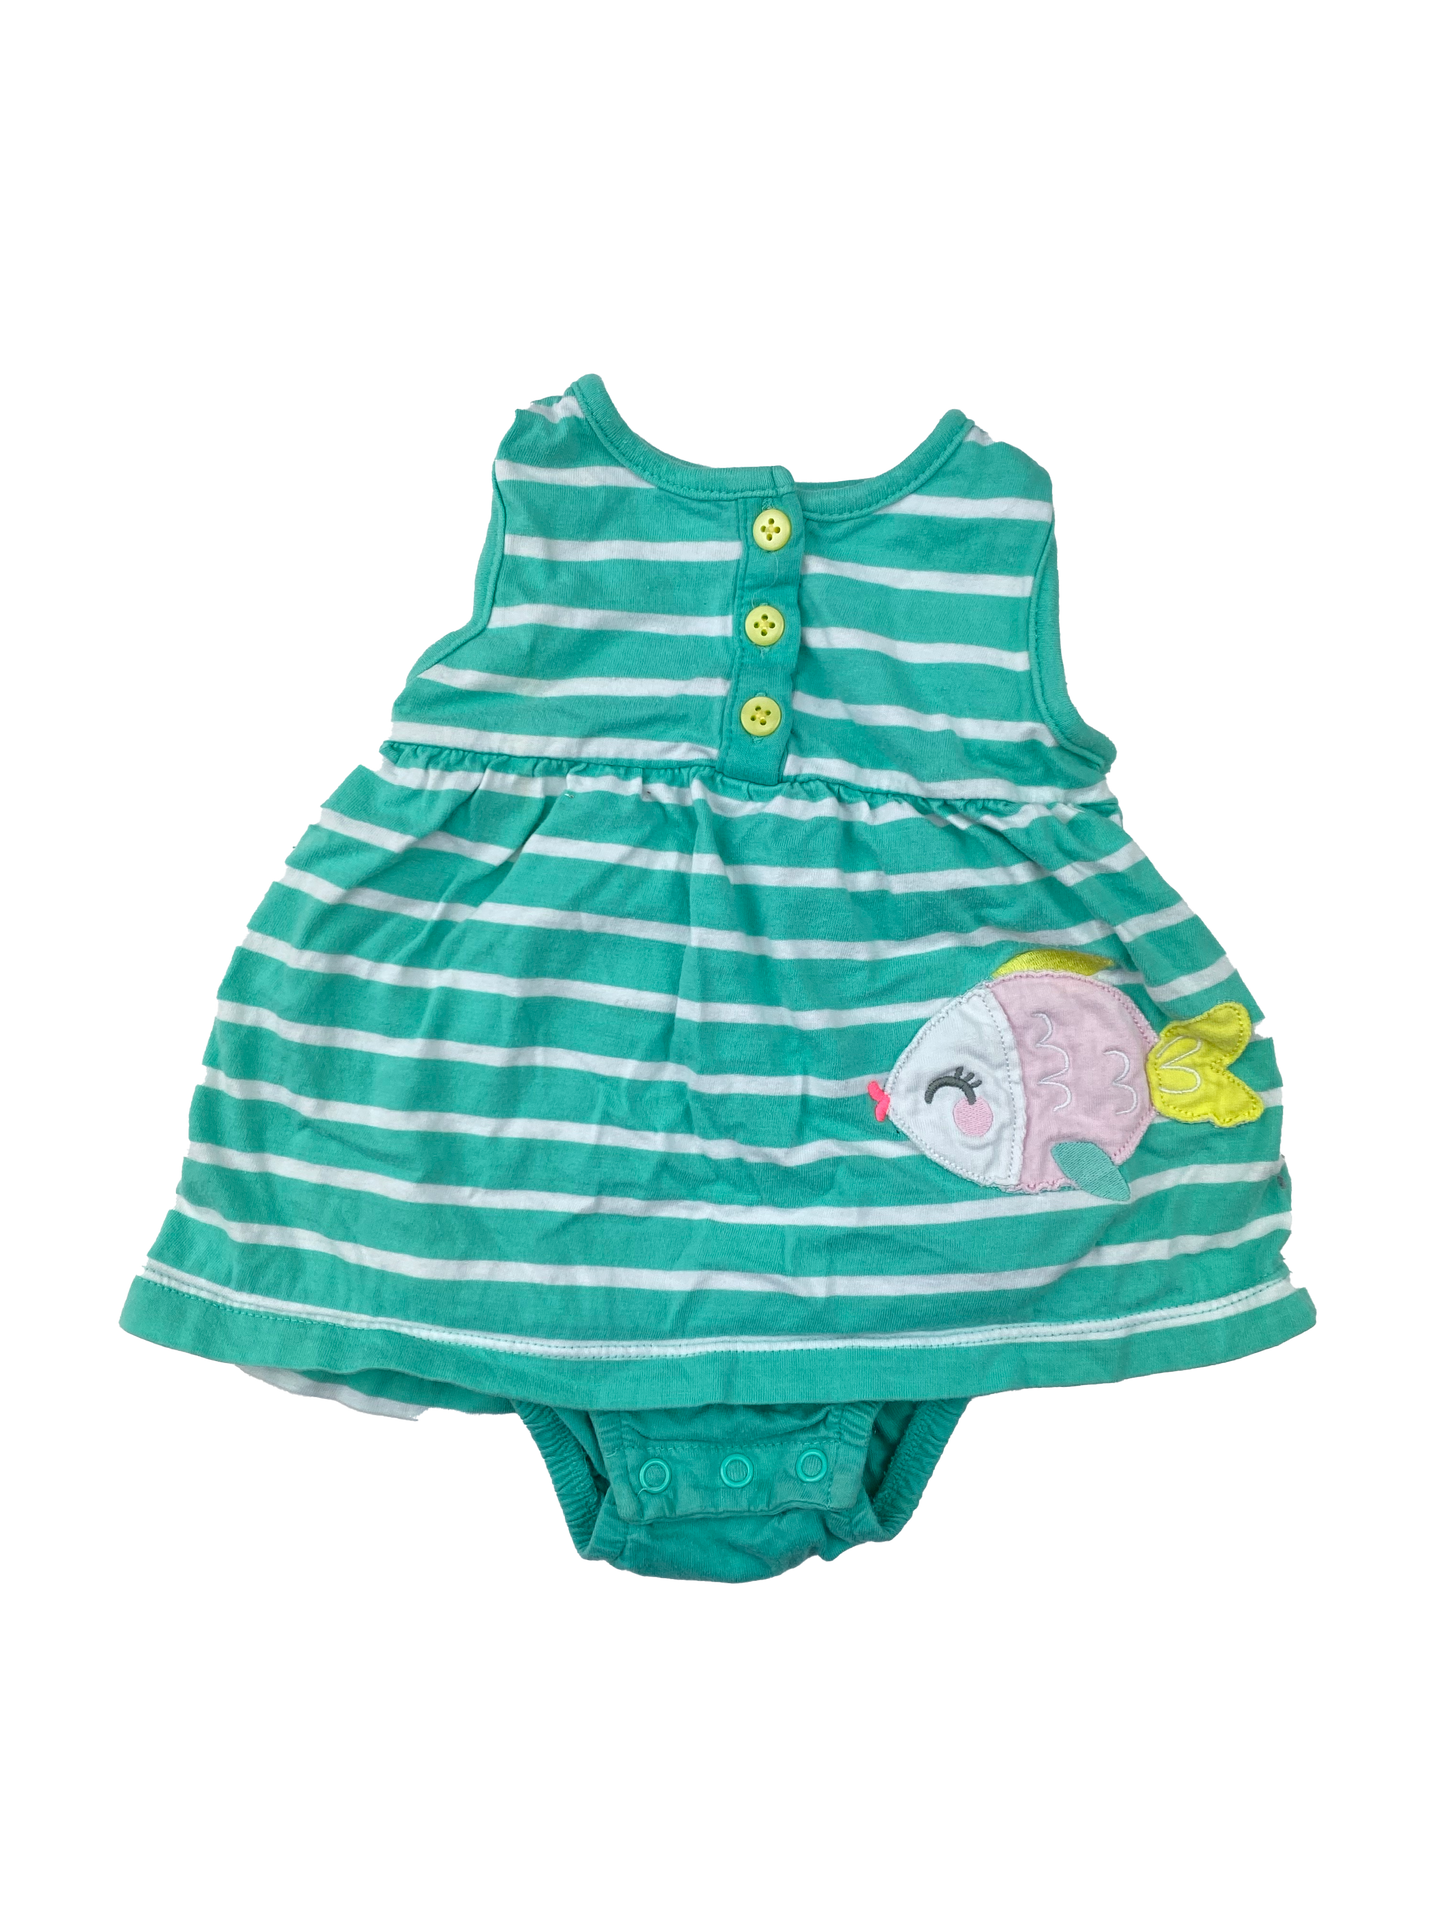 Carter's Turquoise Dress with Fish 9M